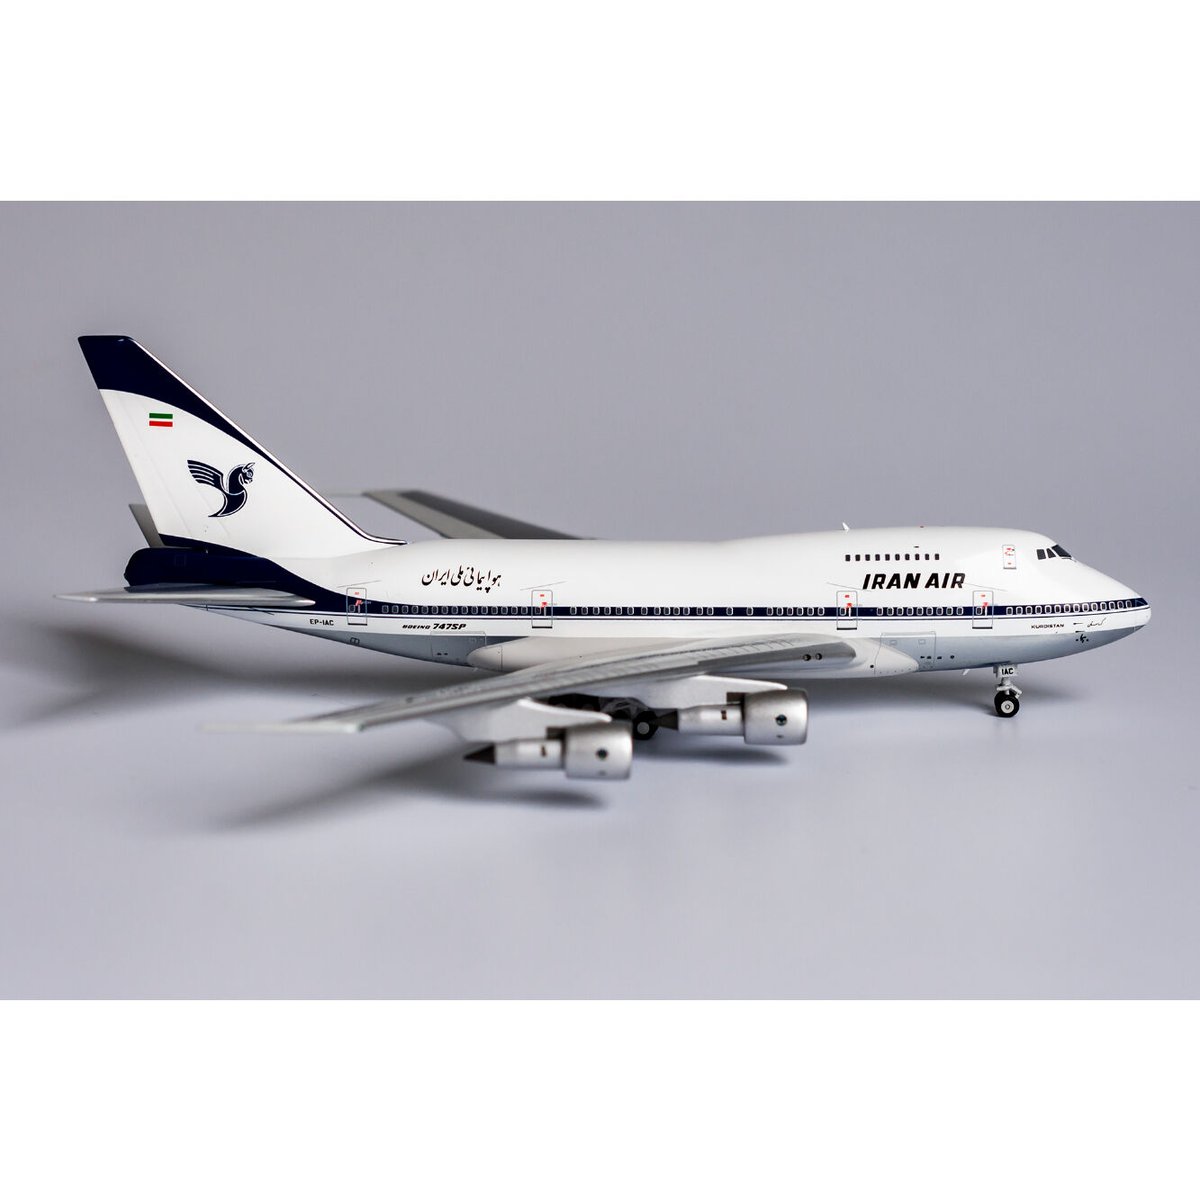 1/400 747SP イラン航空late 1970's livery EP-IA...